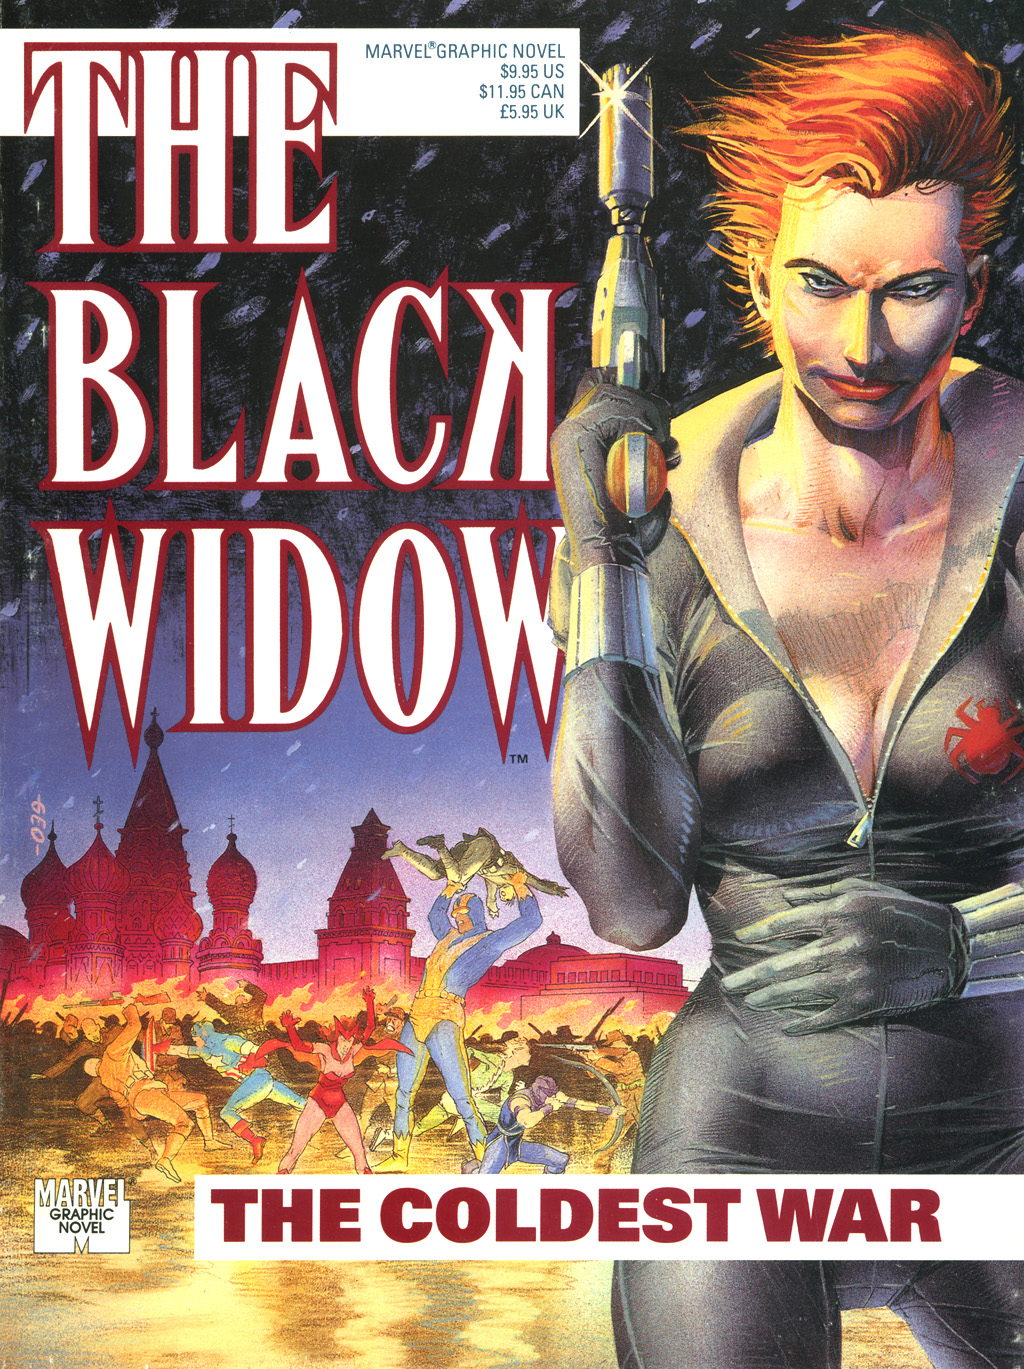 Read online Marvel Graphic Novel comic -  Issue #61 - Black Widow - The Coldest War - 1